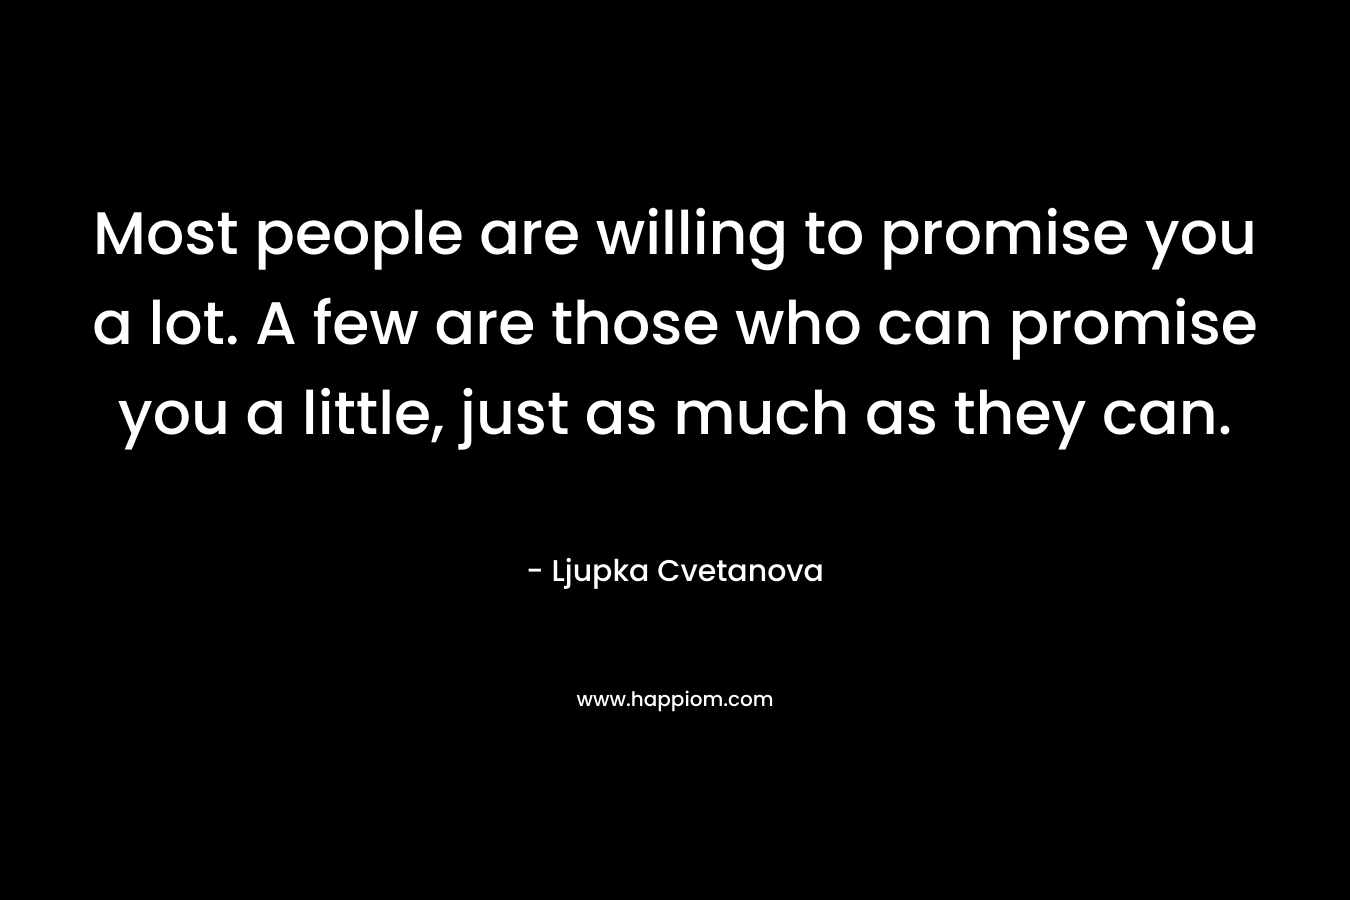 Most people are willing to promise you a lot. A few are those who can promise you a little, just as much as they can.